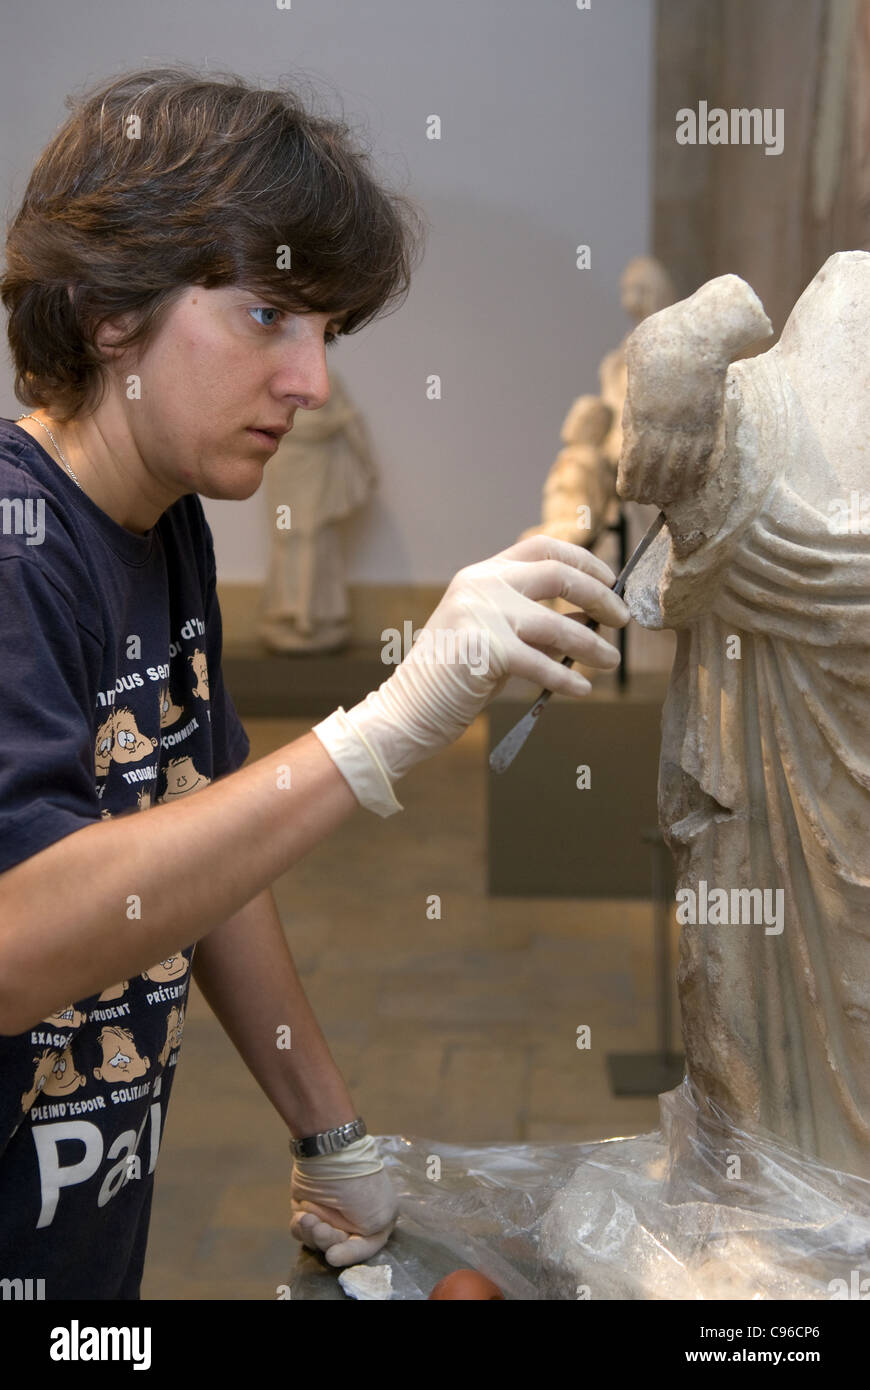 Archaeologist carrying out restoration work on an artifact at Beirut's National Museum, Badaro, Beirut, Lebanon. Stock Photo